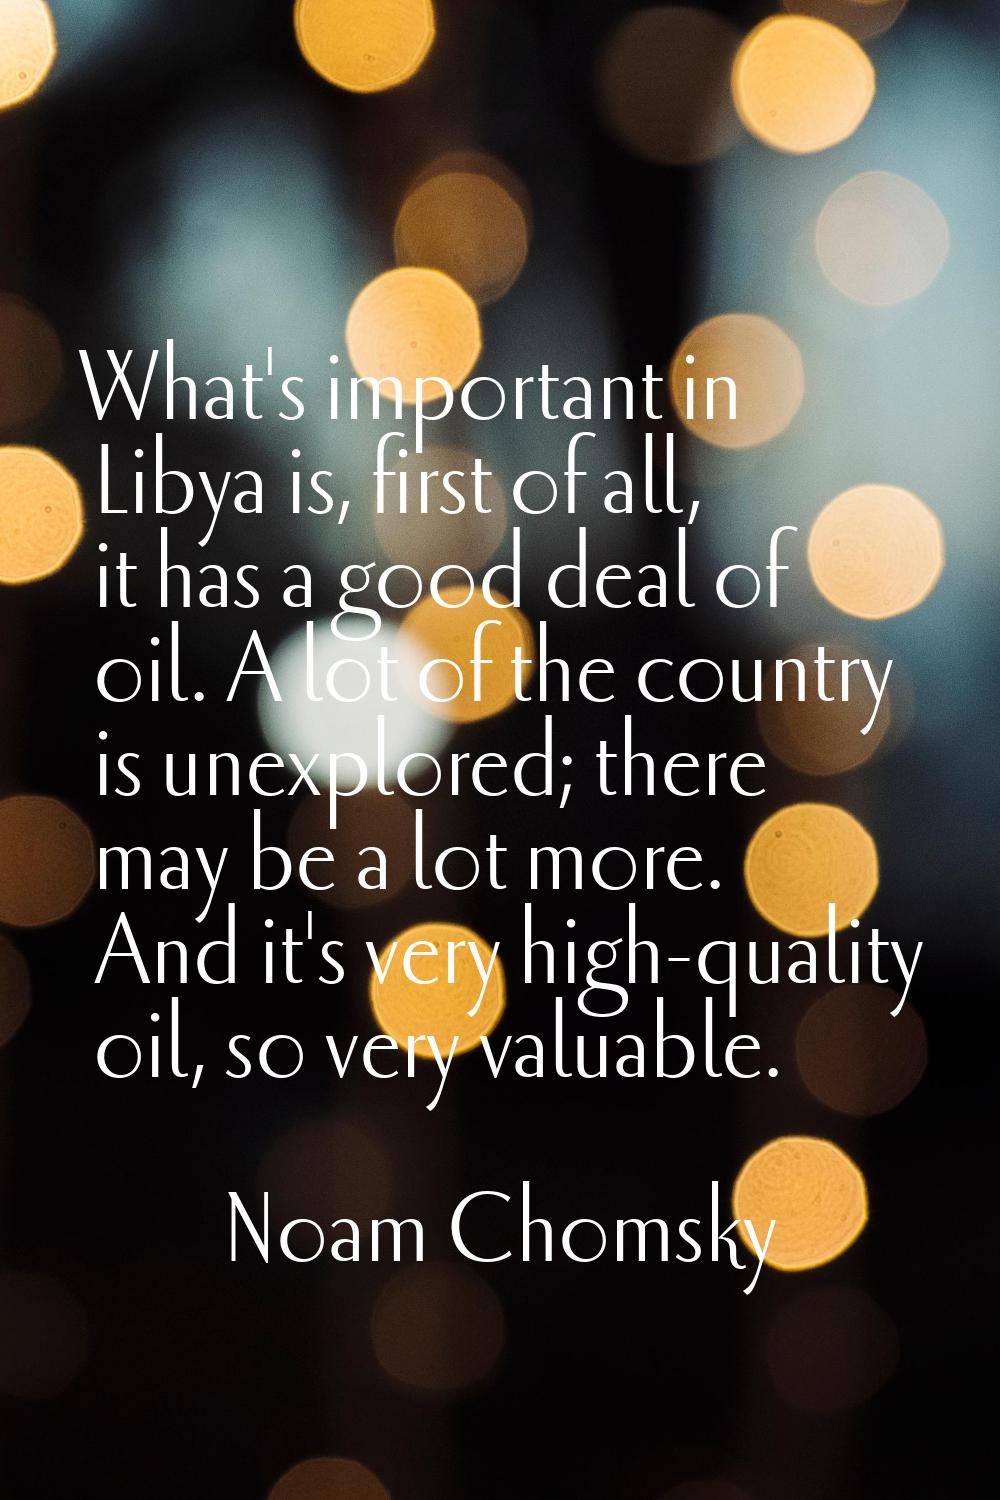 What's important in Libya is, first of all, it has a good deal of oil. A lot of the country is unex